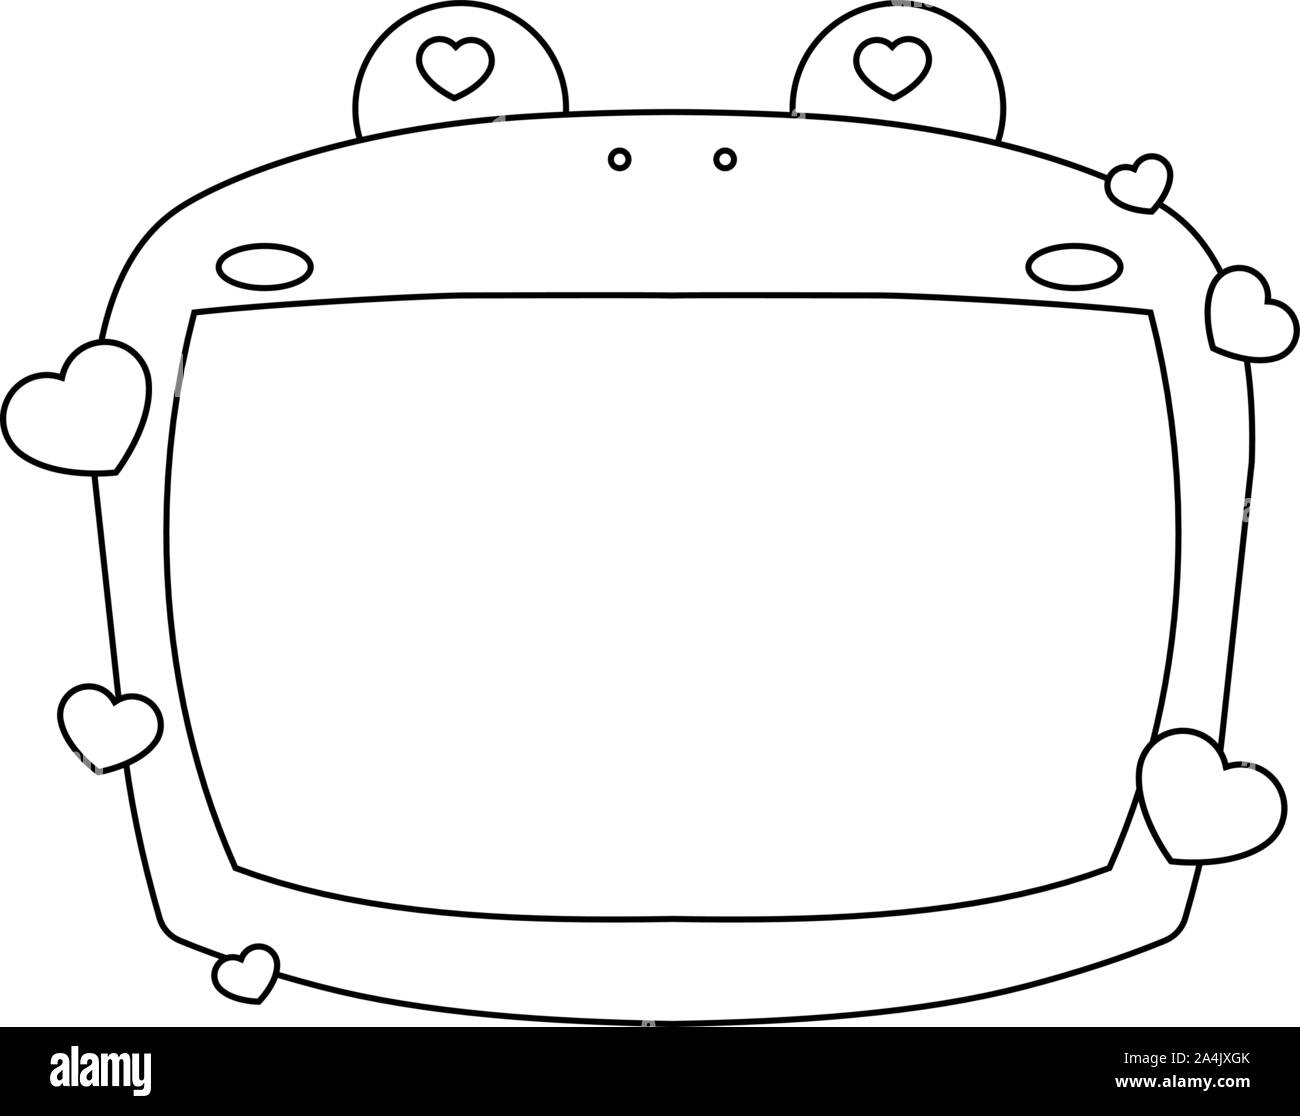 This is a illustration of Cute frog whiteboard Stock Vector